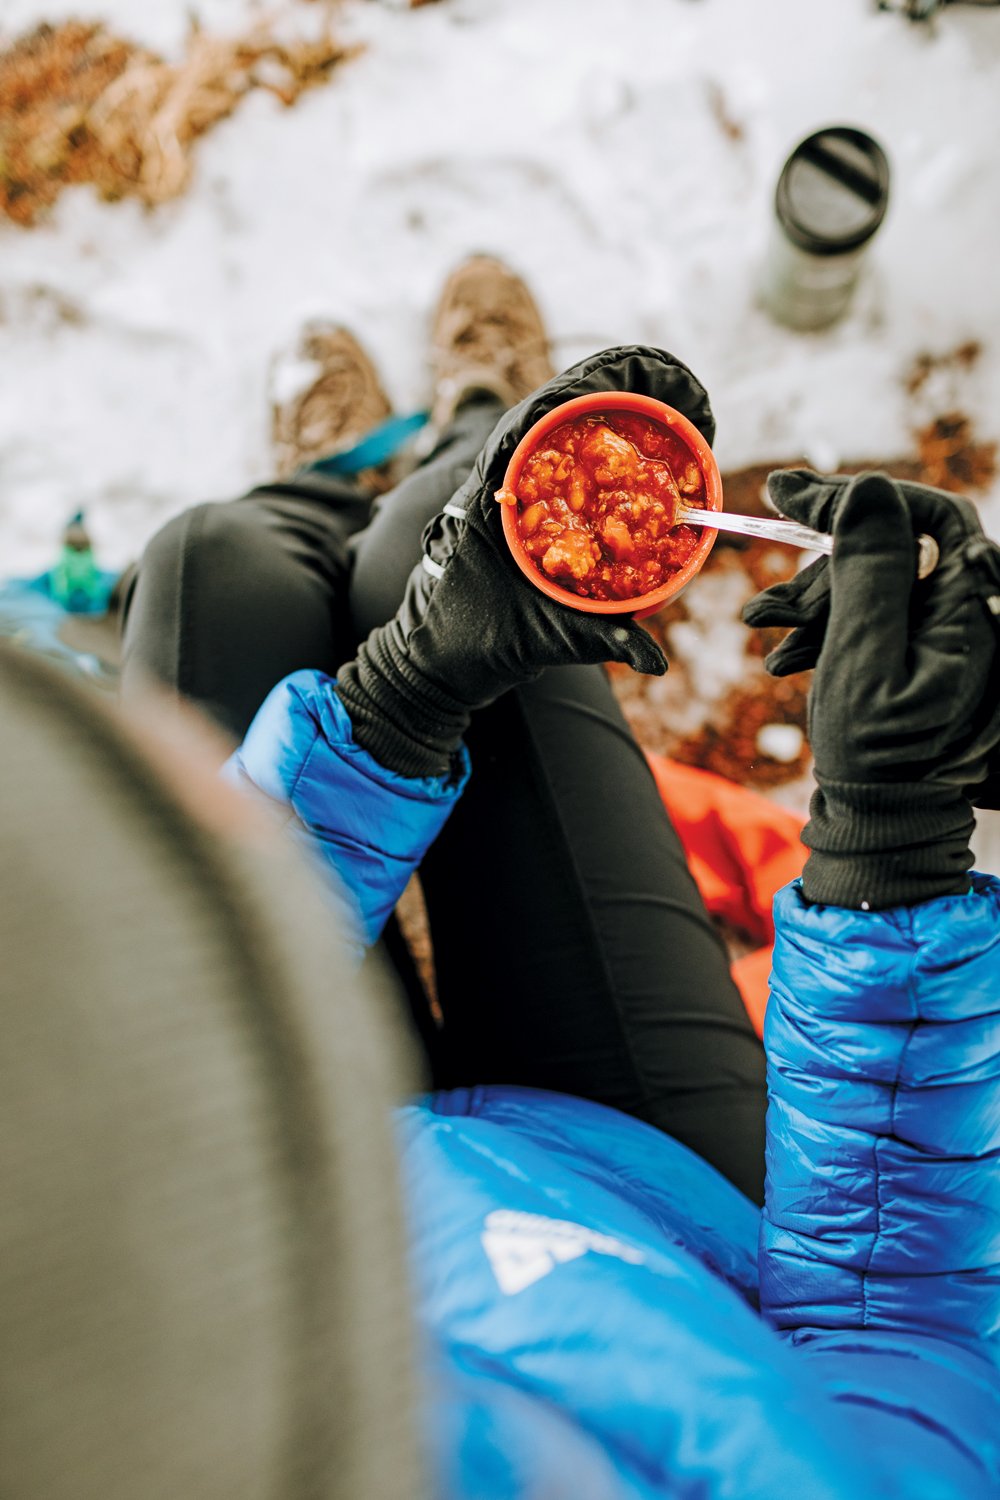 Eating after a cold-weather hike